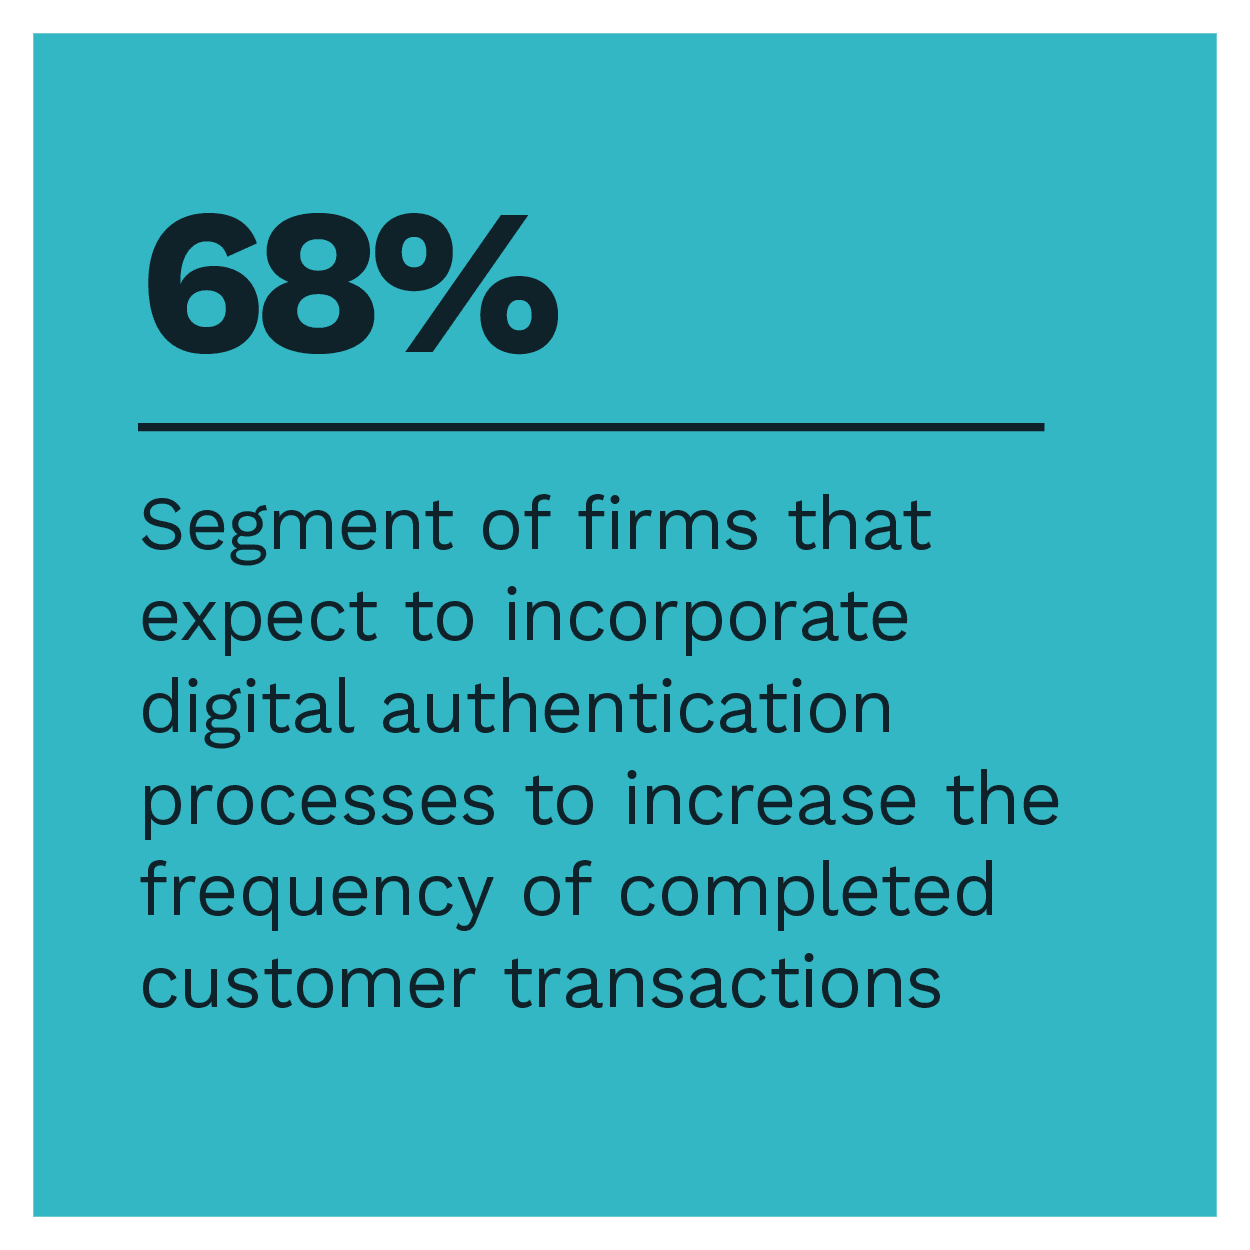 Firms expecting to incorporate digital authentication processes to increase customer transaction frequency